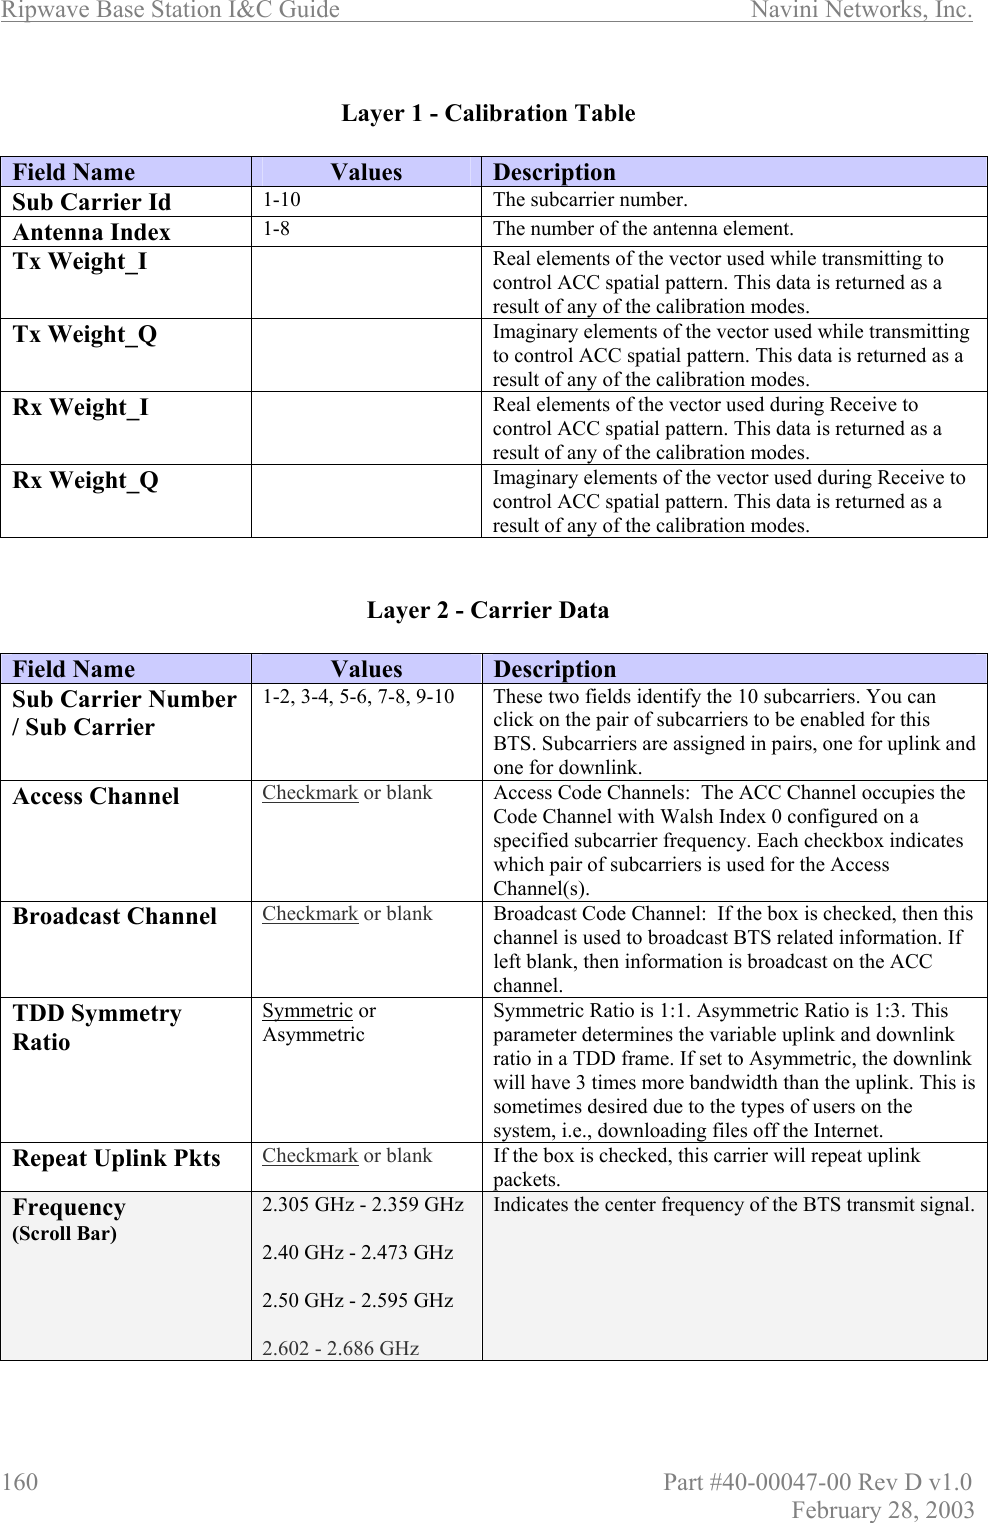 Ripwave Base Station I&amp;C Guide                      Navini Networks, Inc. 160                          Part #40-00047-00 Rev D v1.0 February 28, 2003  Layer 1 - Calibration Table  Field Name  Values  Description Sub Carrier Id  1-10  The subcarrier number. Antenna Index  1-8  The number of the antenna element. Tx Weight_I    Real elements of the vector used while transmitting to control ACC spatial pattern. This data is returned as a result of any of the calibration modes. Tx Weight_Q    Imaginary elements of the vector used while transmitting to control ACC spatial pattern. This data is returned as a result of any of the calibration modes. Rx Weight_I    Real elements of the vector used during Receive to control ACC spatial pattern. This data is returned as a result of any of the calibration modes. Rx Weight_Q    Imaginary elements of the vector used during Receive to control ACC spatial pattern. This data is returned as a result of any of the calibration modes.   Layer 2 - Carrier Data  Field Name  Values  Description Sub Carrier Number / Sub Carrier 1-2, 3-4, 5-6, 7-8, 9-10  These two fields identify the 10 subcarriers. You can click on the pair of subcarriers to be enabled for this BTS. Subcarriers are assigned in pairs, one for uplink and one for downlink. Access Channel  Checkmark or blank  Access Code Channels:  The ACC Channel occupies the Code Channel with Walsh Index 0 configured on a specified subcarrier frequency. Each checkbox indicates which pair of subcarriers is used for the Access Channel(s). Broadcast Channel  Checkmark or blank  Broadcast Code Channel:  If the box is checked, then this channel is used to broadcast BTS related information. If left blank, then information is broadcast on the ACC channel. TDD Symmetry Ratio Symmetric or Asymmetric Symmetric Ratio is 1:1. Asymmetric Ratio is 1:3. This parameter determines the variable uplink and downlink ratio in a TDD frame. If set to Asymmetric, the downlink will have 3 times more bandwidth than the uplink. This is sometimes desired due to the types of users on the system, i.e., downloading files off the Internet. Repeat Uplink Pkts  Checkmark or blank  If the box is checked, this carrier will repeat uplink packets. Frequency (Scroll Bar) 2.305 GHz - 2.359 GHz  2.40 GHz - 2.473 GHz  2.50 GHz - 2.595 GHz  2.602 - 2.686 GHz Indicates the center frequency of the BTS transmit signal.   